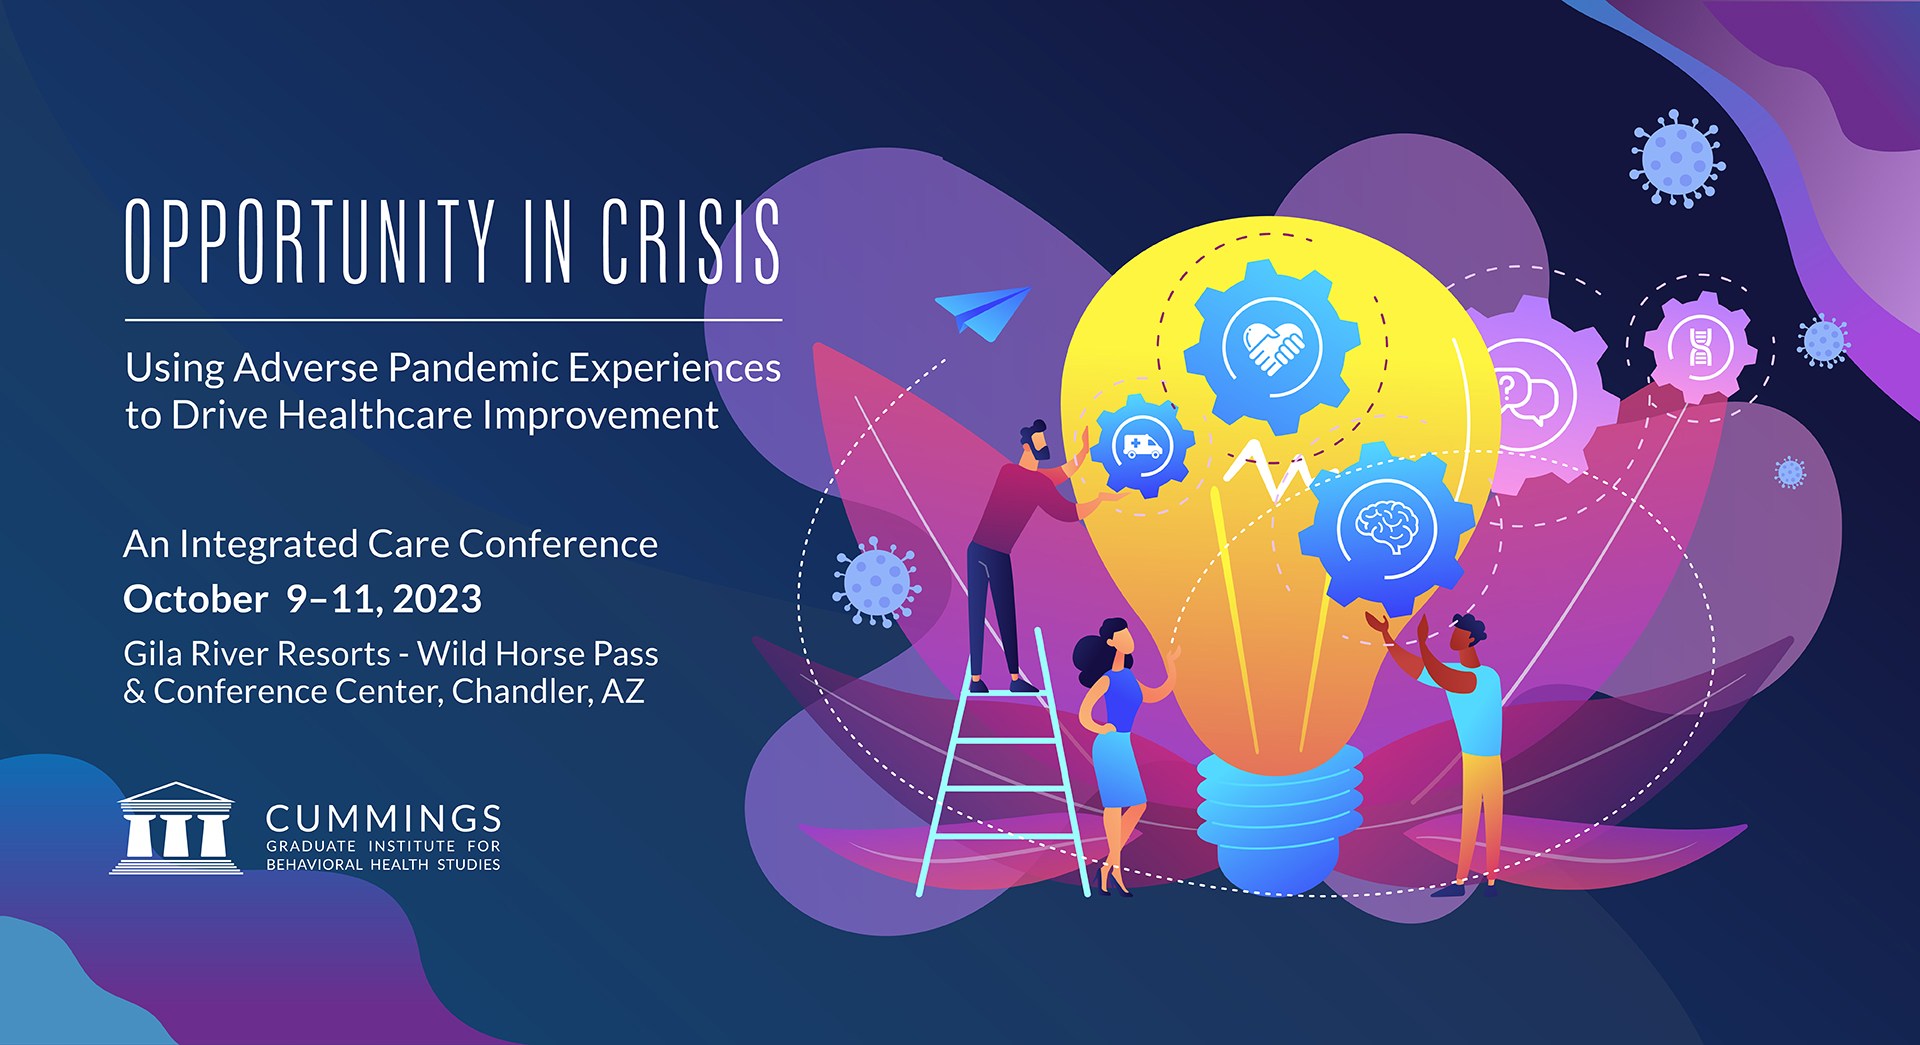 Opportunity in Crisis - Using Adverse Pandemic Experiences to Drive Healthcare Improvement, An integrated care conference, October 9-11, 2023 at the Gila River Resorts – Wild Horse Pass & Conference Center in Chandler, Arizona